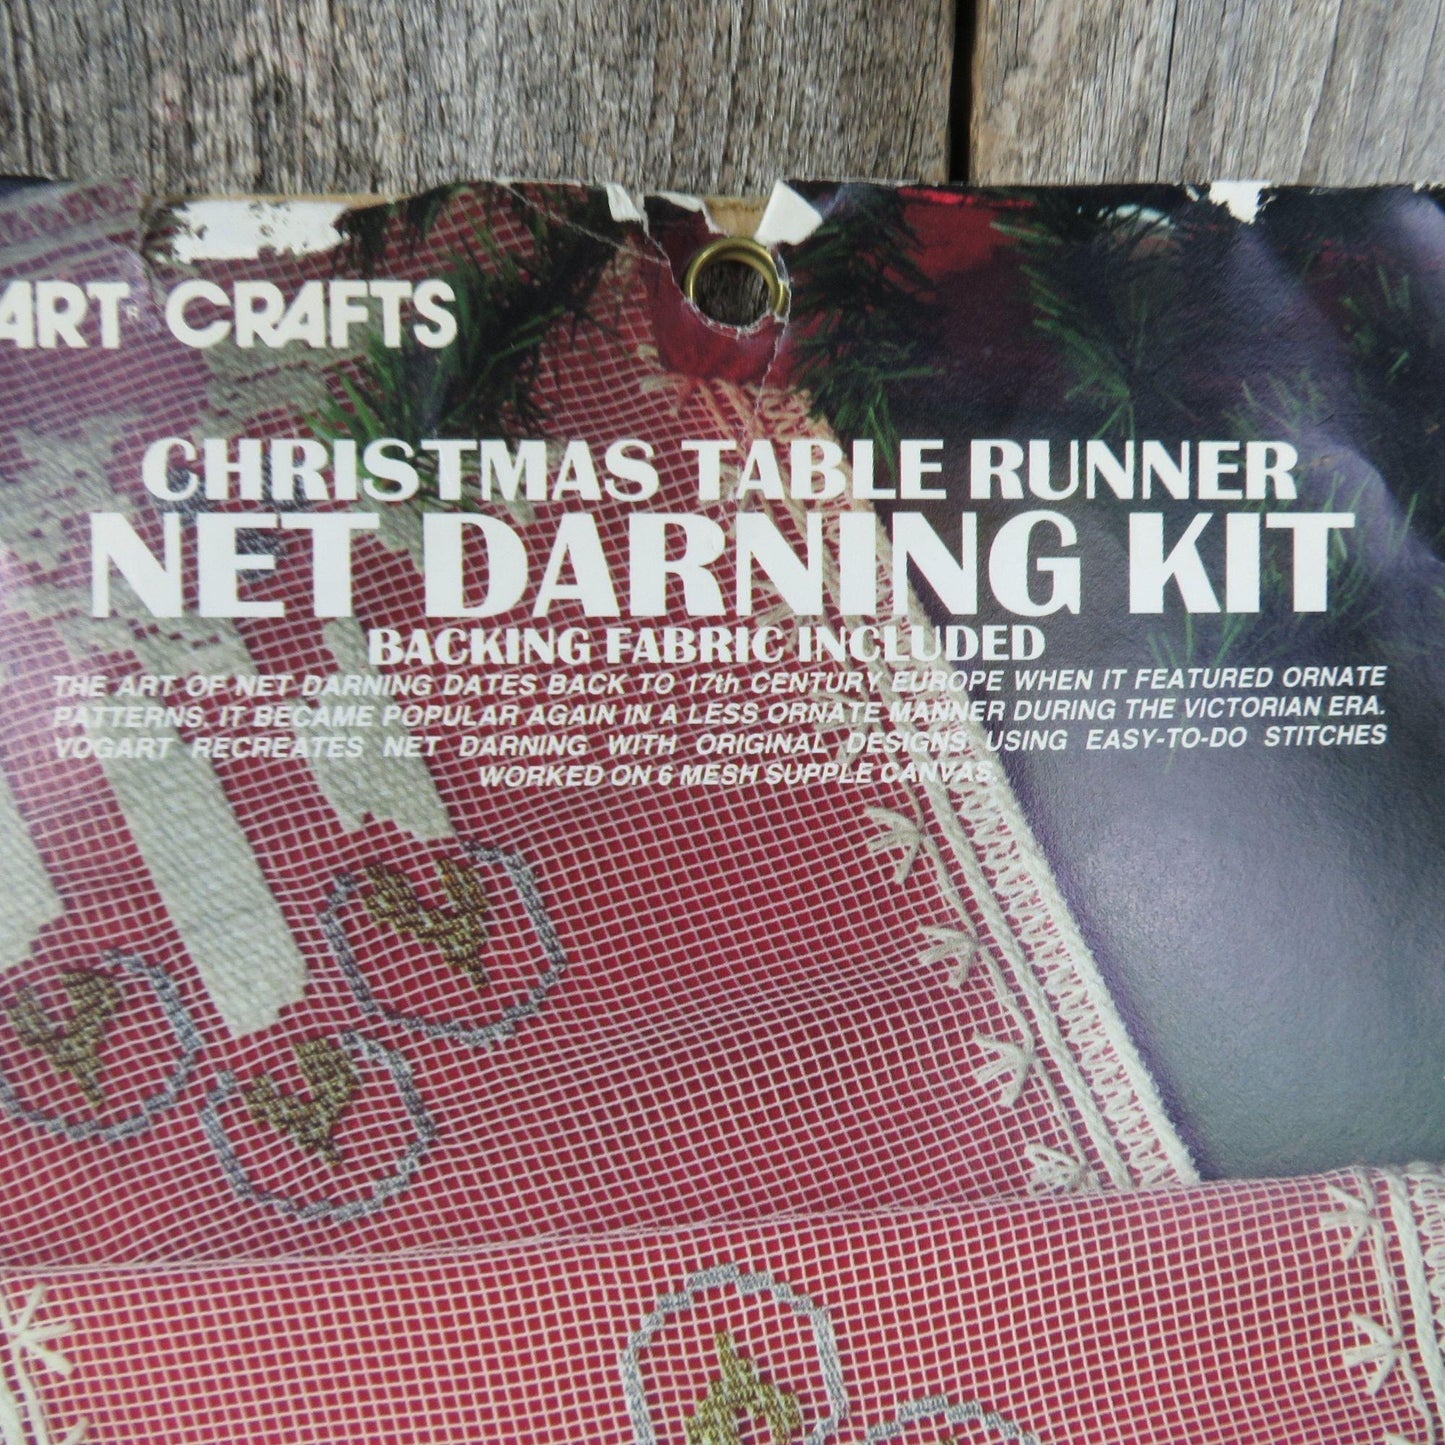 Vintage Christmas Table Runner Lace Net Darning Kit Candles Vogart Crafts 2948 Filet Lace Embroidery Craft Kit White Red